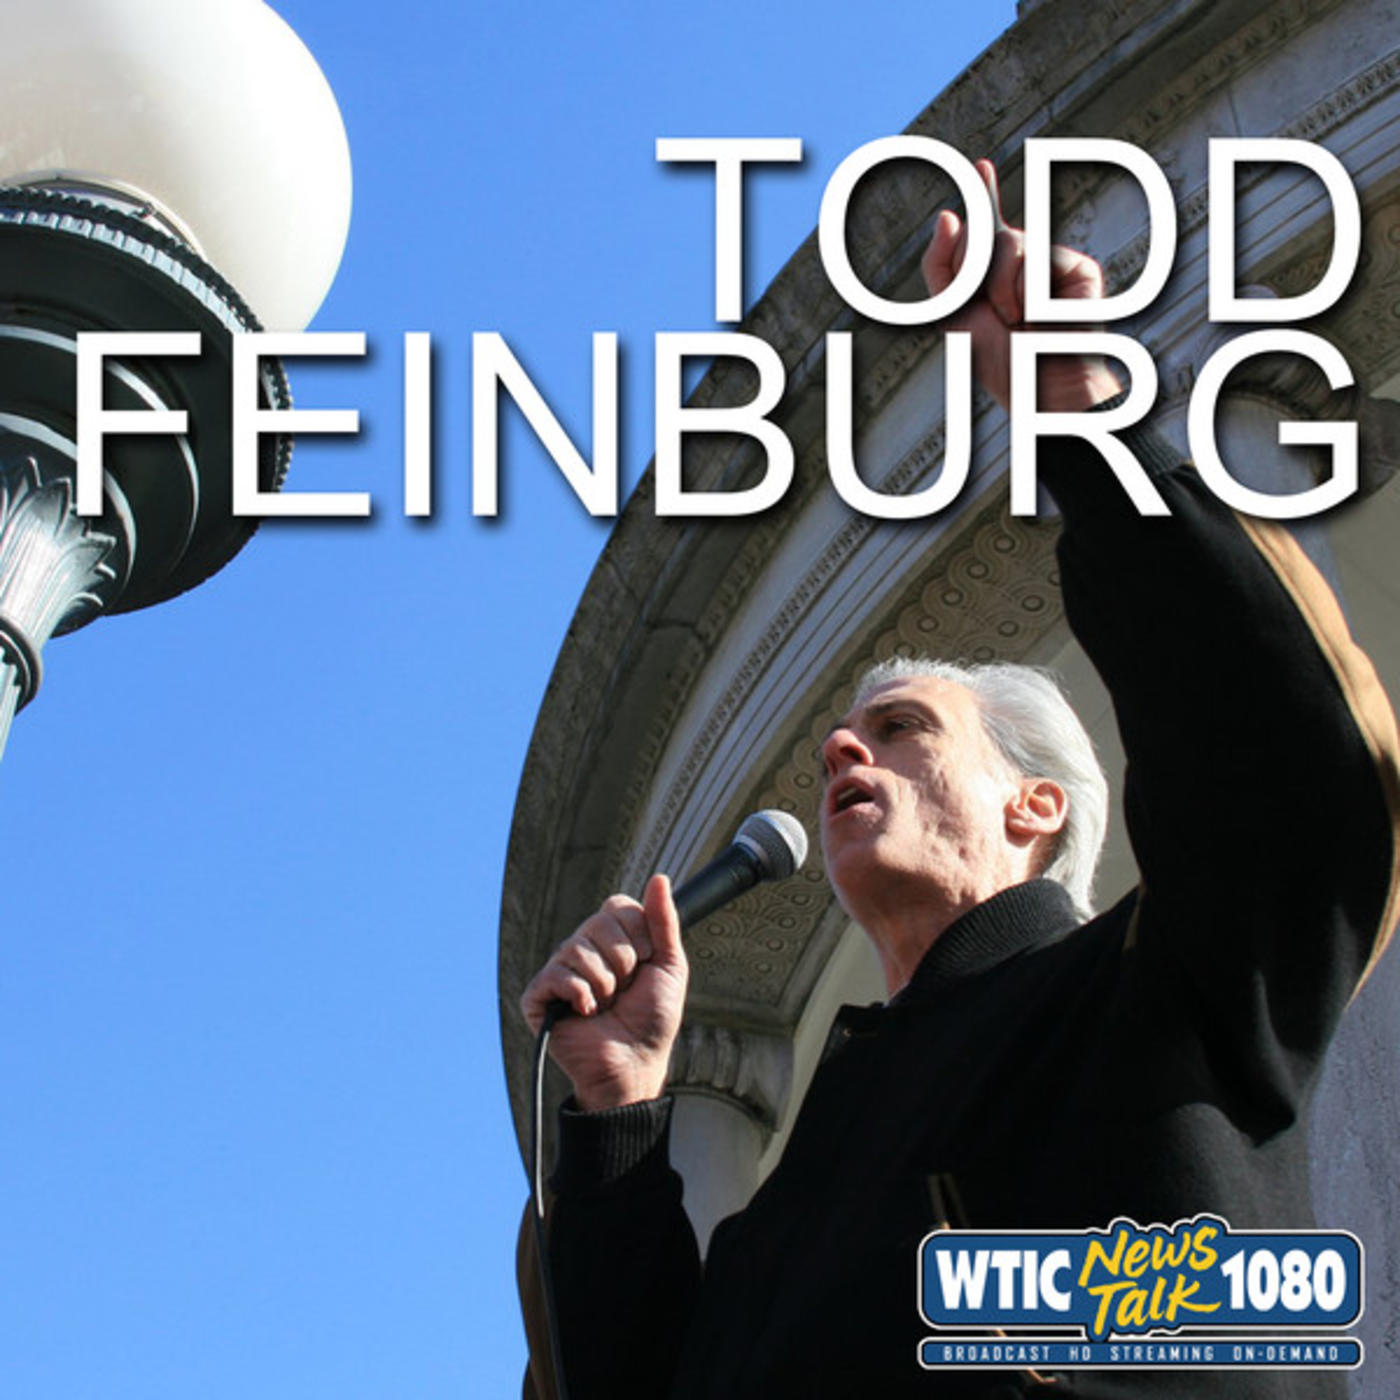 Todd Feinburg: The Perspective of a Young Conservative (08/26/20)